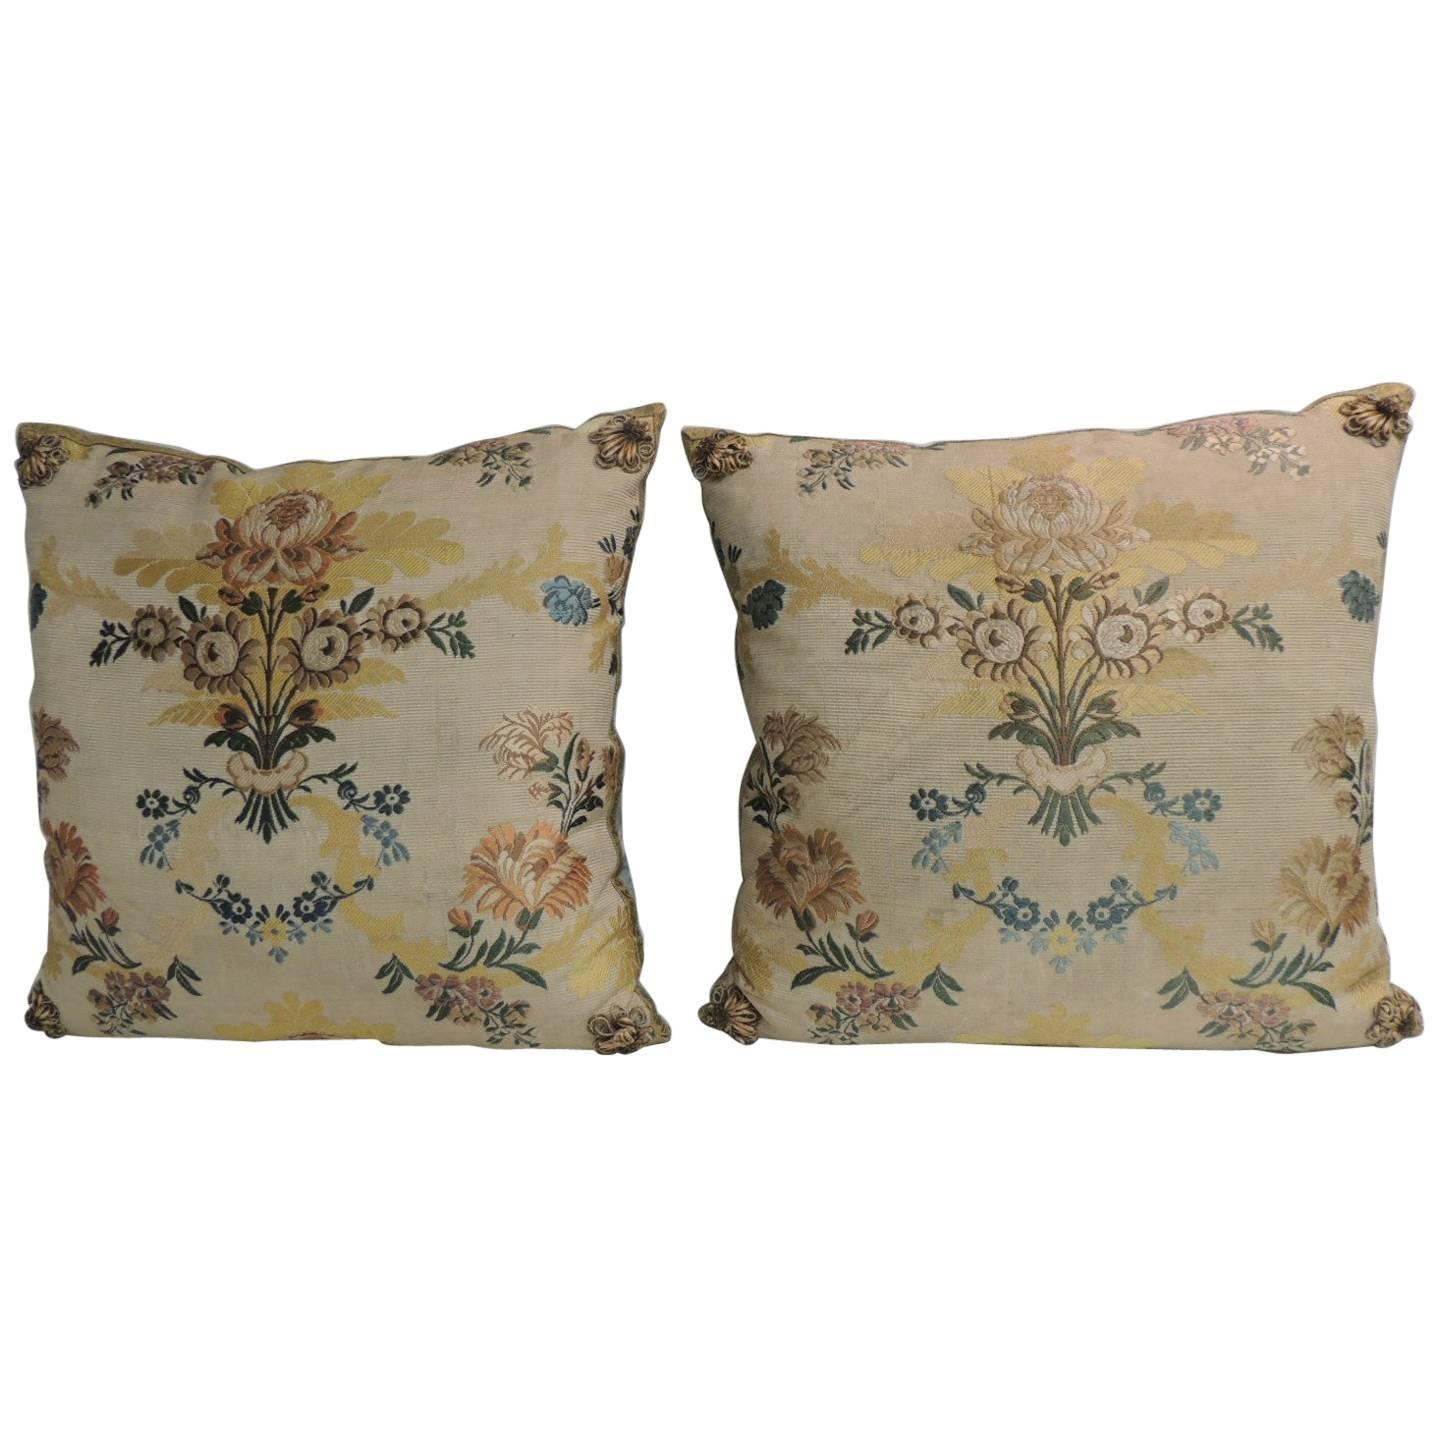 Pair of Antique French Silk Brocade Yellow and Blue Decorative Pillows